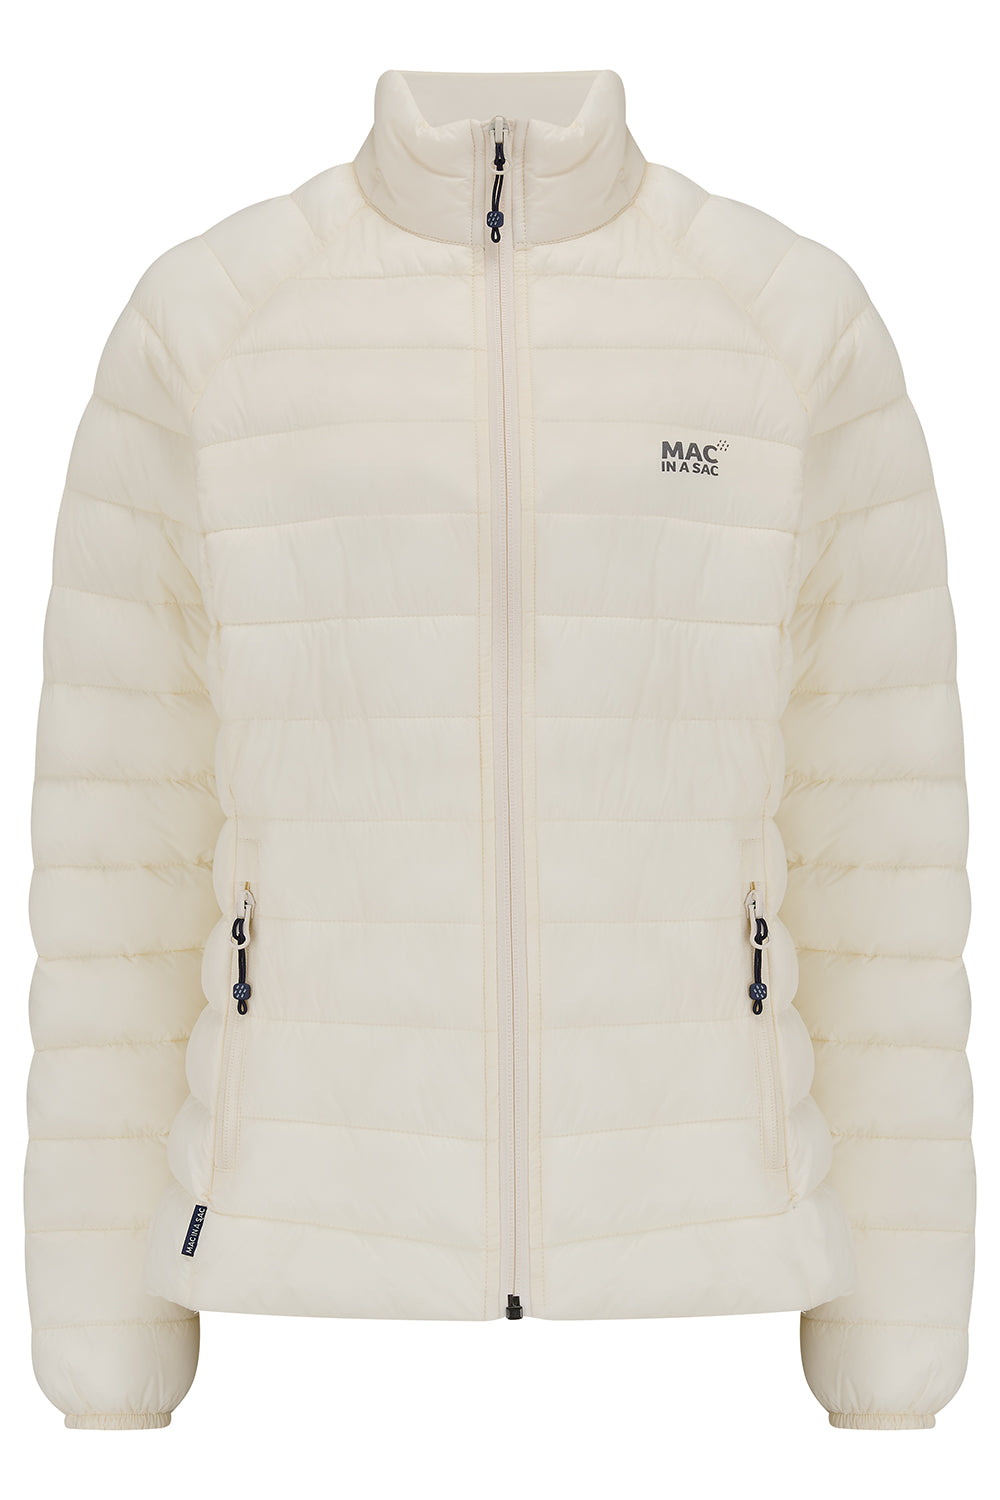 Mac in a Sac Synergy  Packable Women's Insulated Jacket Ivory